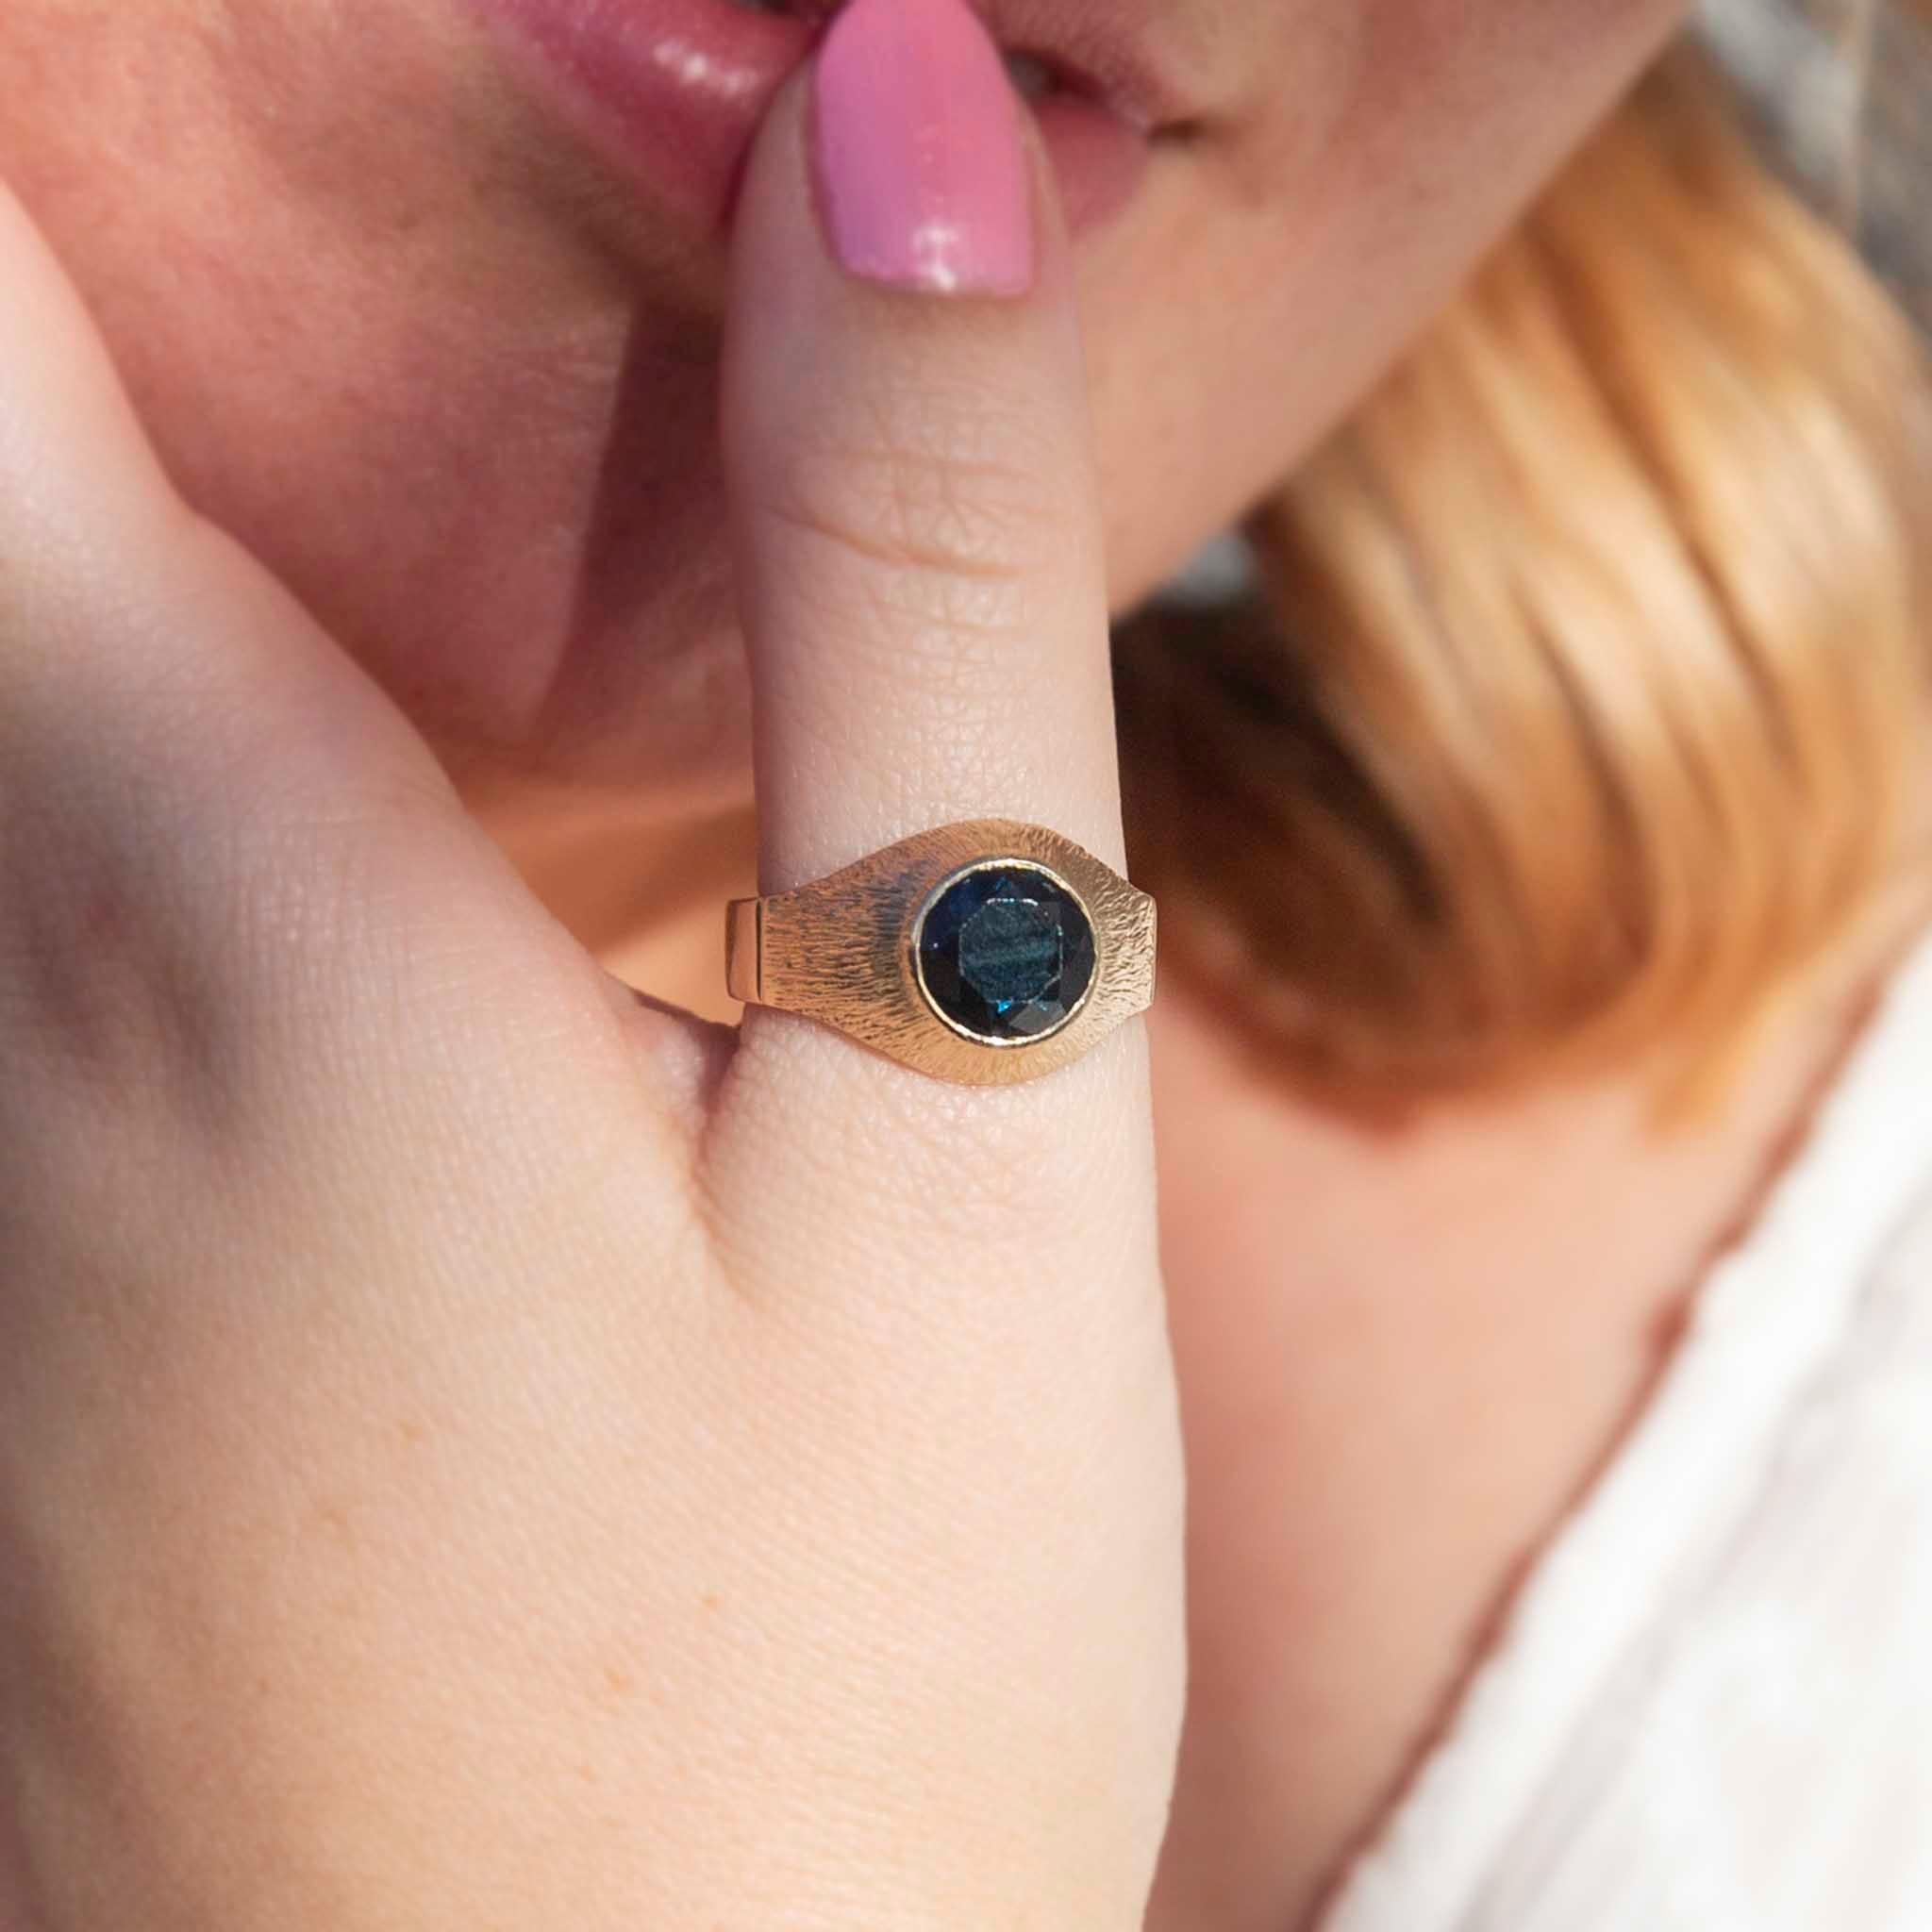 Forged in 9 carat gold, this vintage ring features a deep greenish-blue Australia-type sapphire at the top of a textured dome setting. We have named her The Thiago Ring. She is a wonderfully bold statement ring and is sure to find a beloved place in